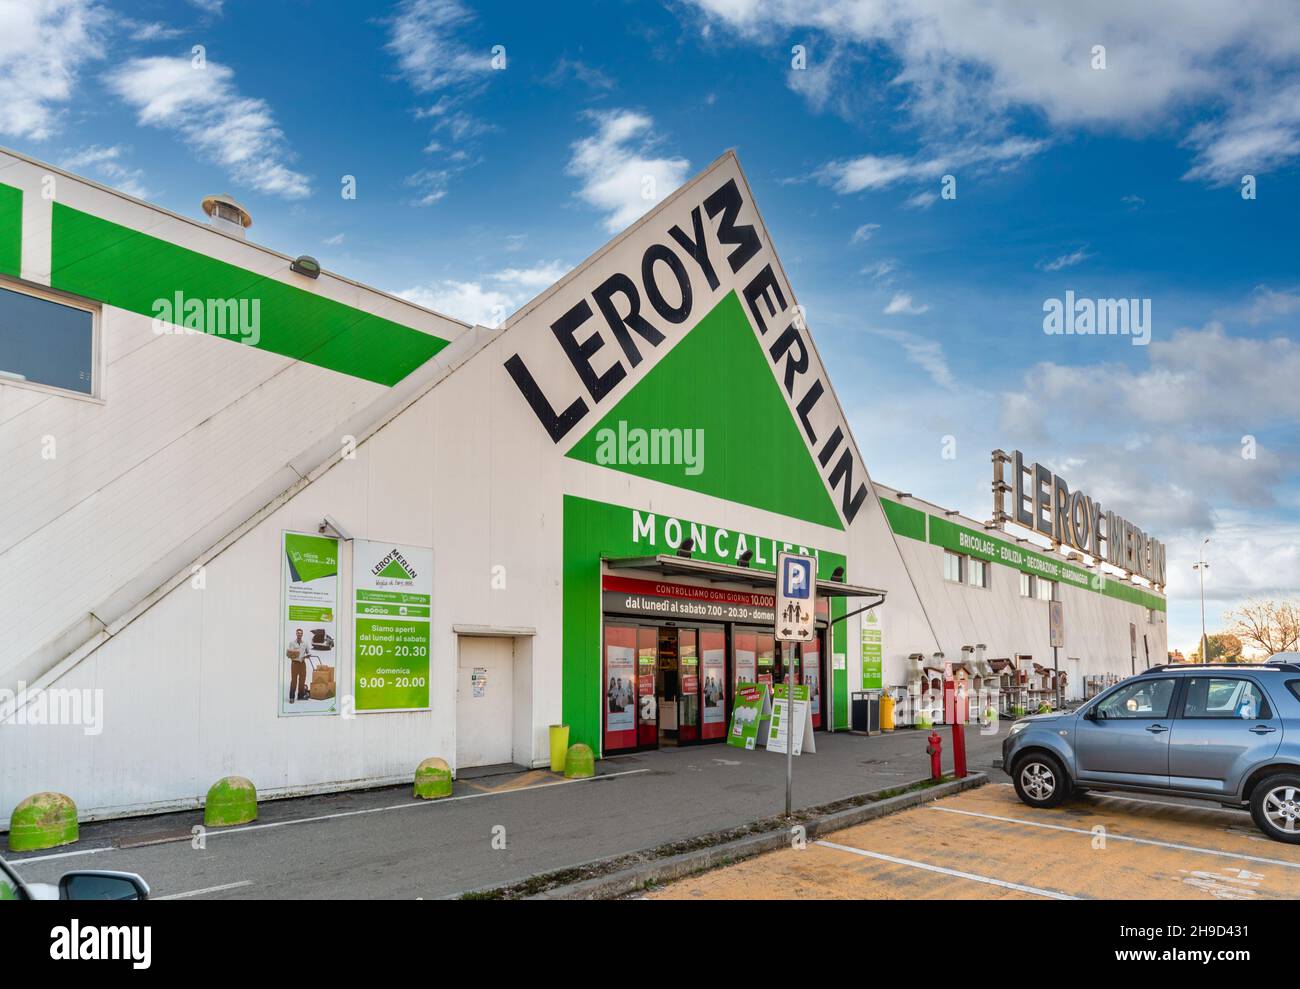 Leroy Merlin Store High Resolution Stock Photography and Images - Alamy